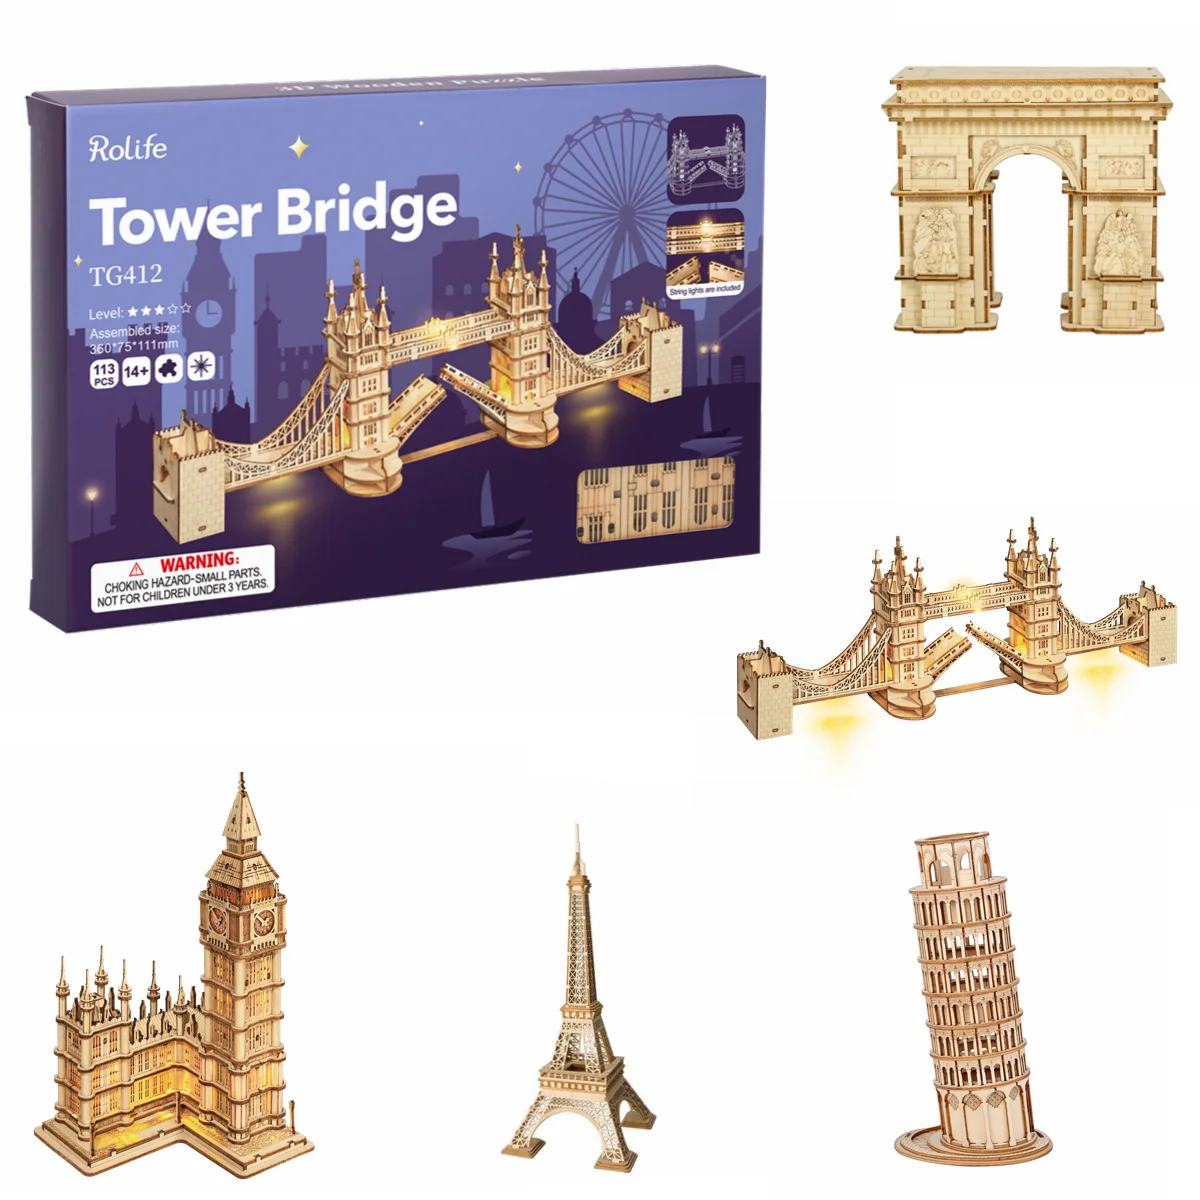 

Robotime Rolife DIY 3D Tower Bridge,Big Ben,Famous Building Wooden Puzzle Game Assembly Toy Gift for Children Teen Adult